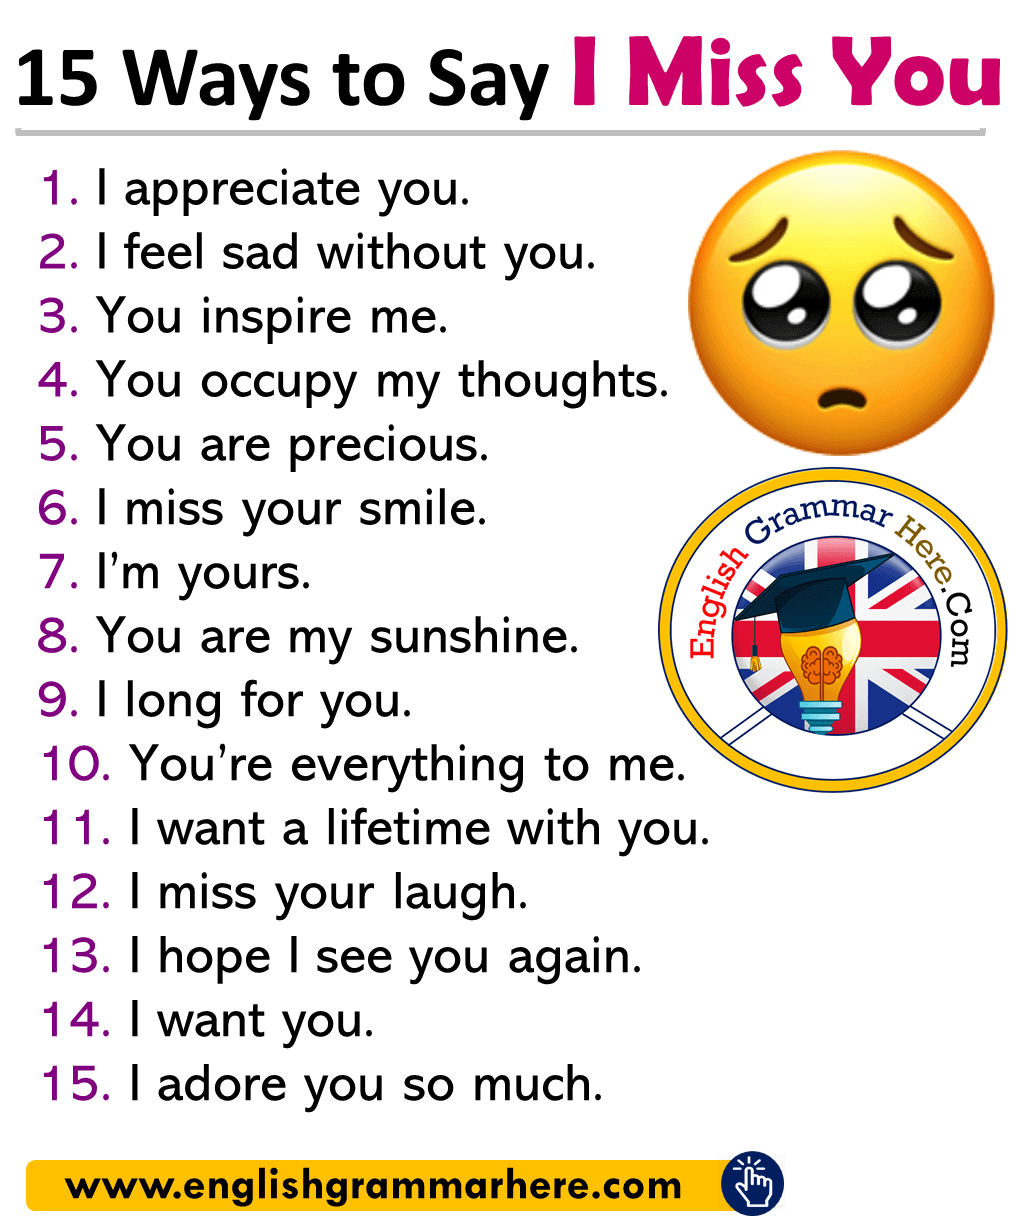 15 Ways to Say I Miss You in English